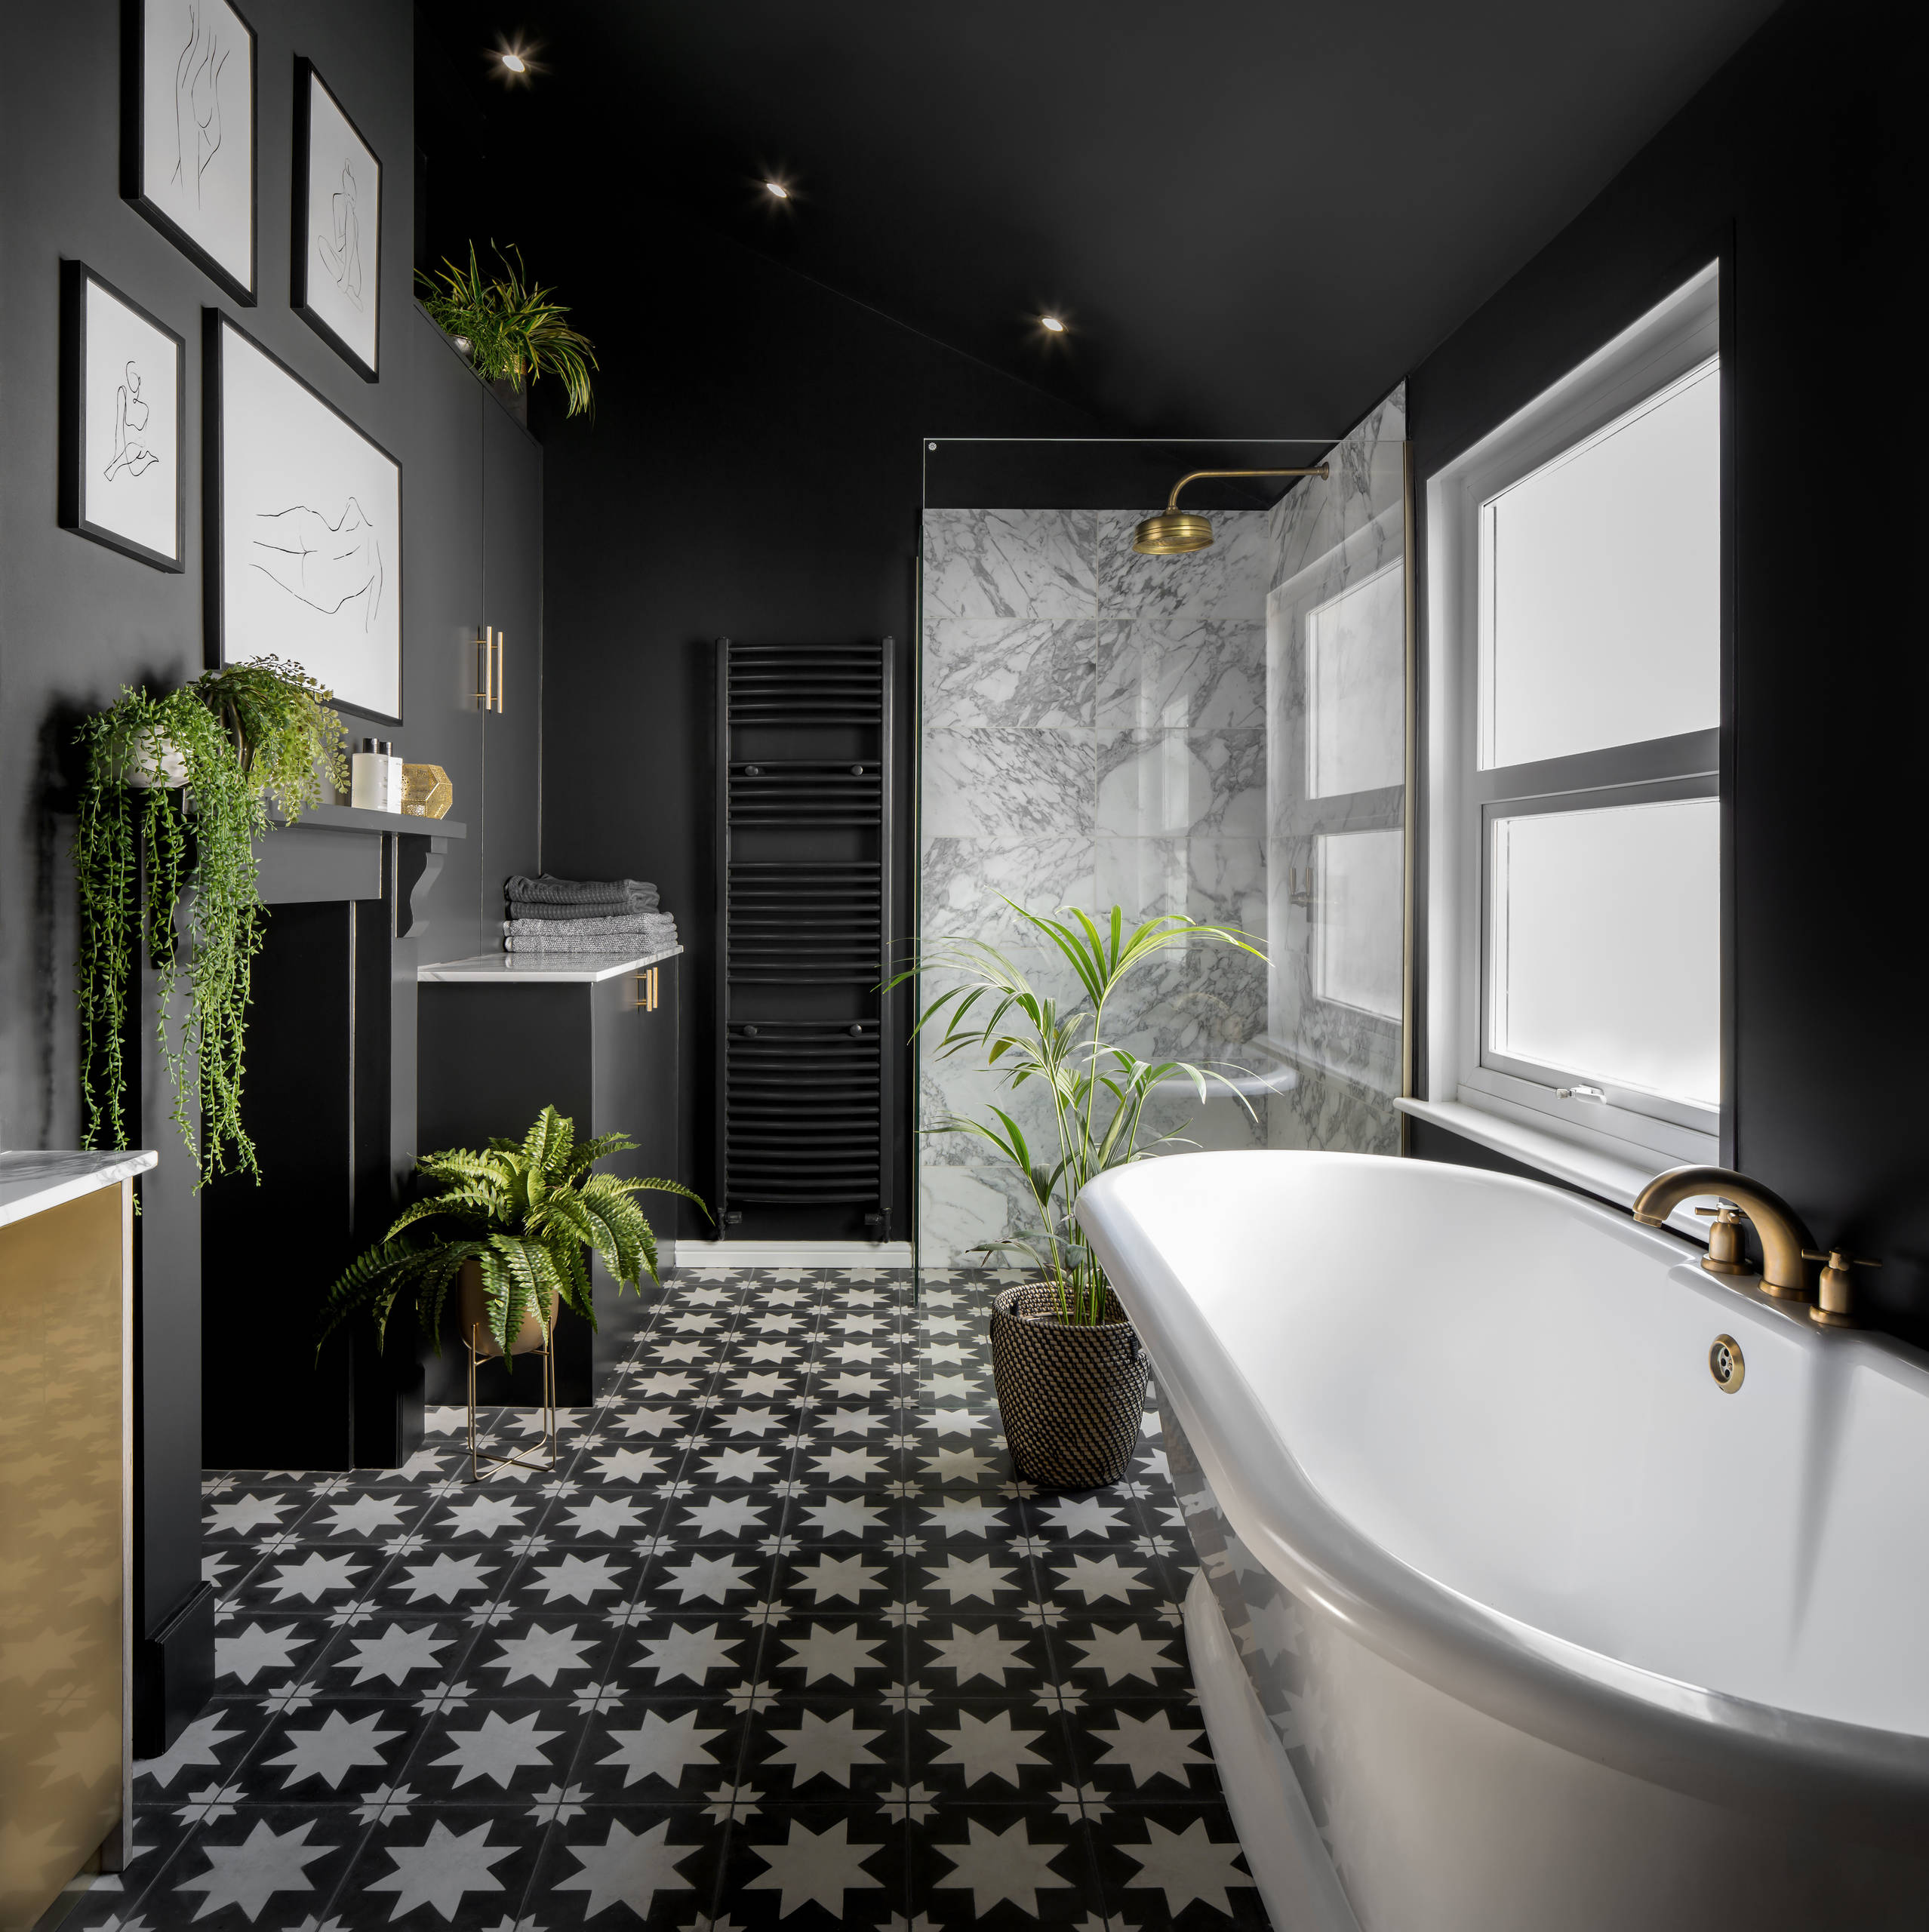 Cost Of Your Bathroom Renovation, How Much Does A Small Bathroom Renovation Cost Uk